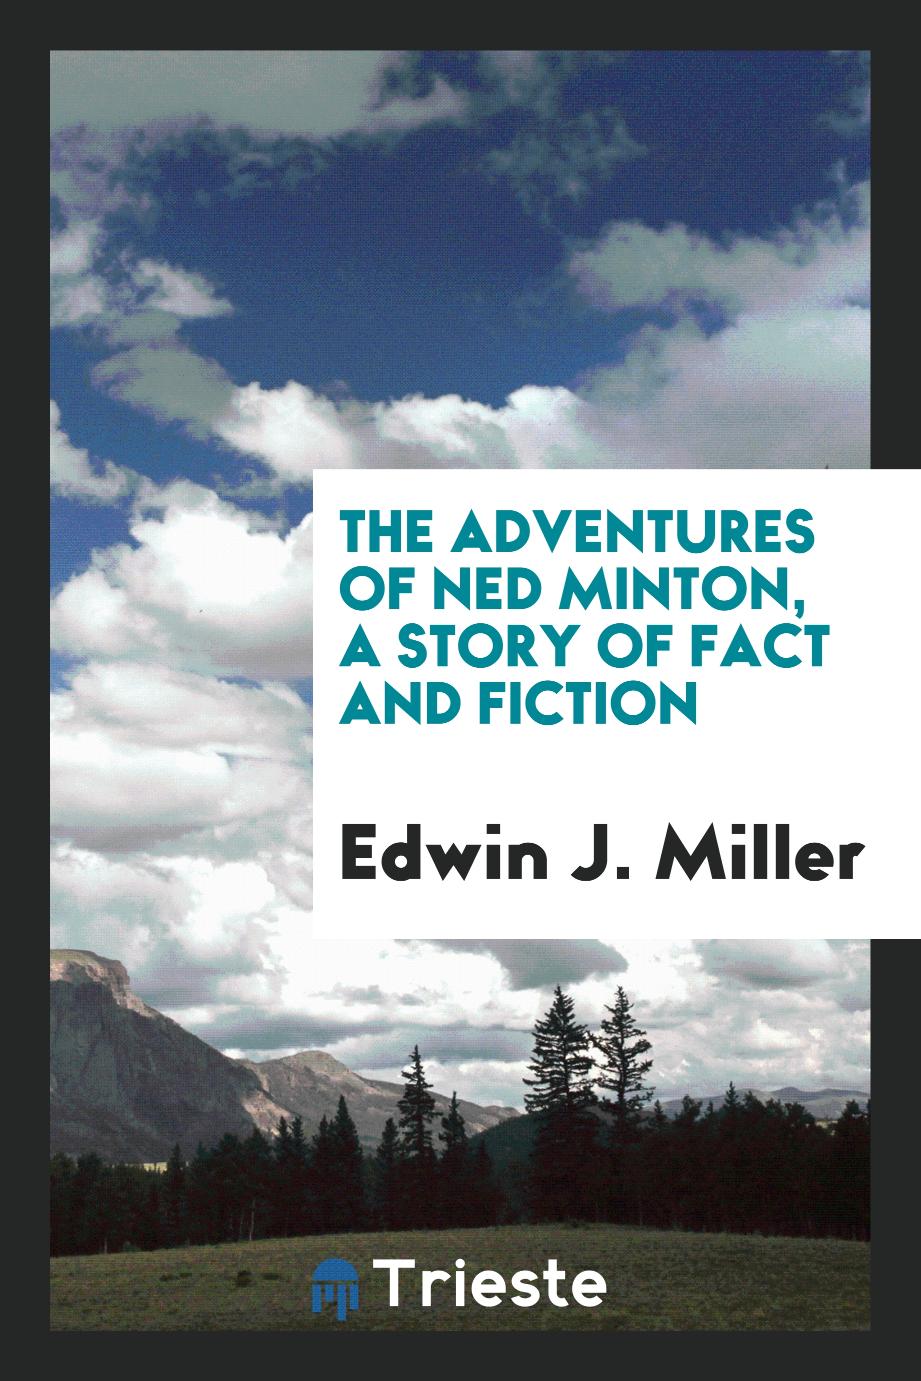 The adventures of Ned Minton, a story of fact and fiction